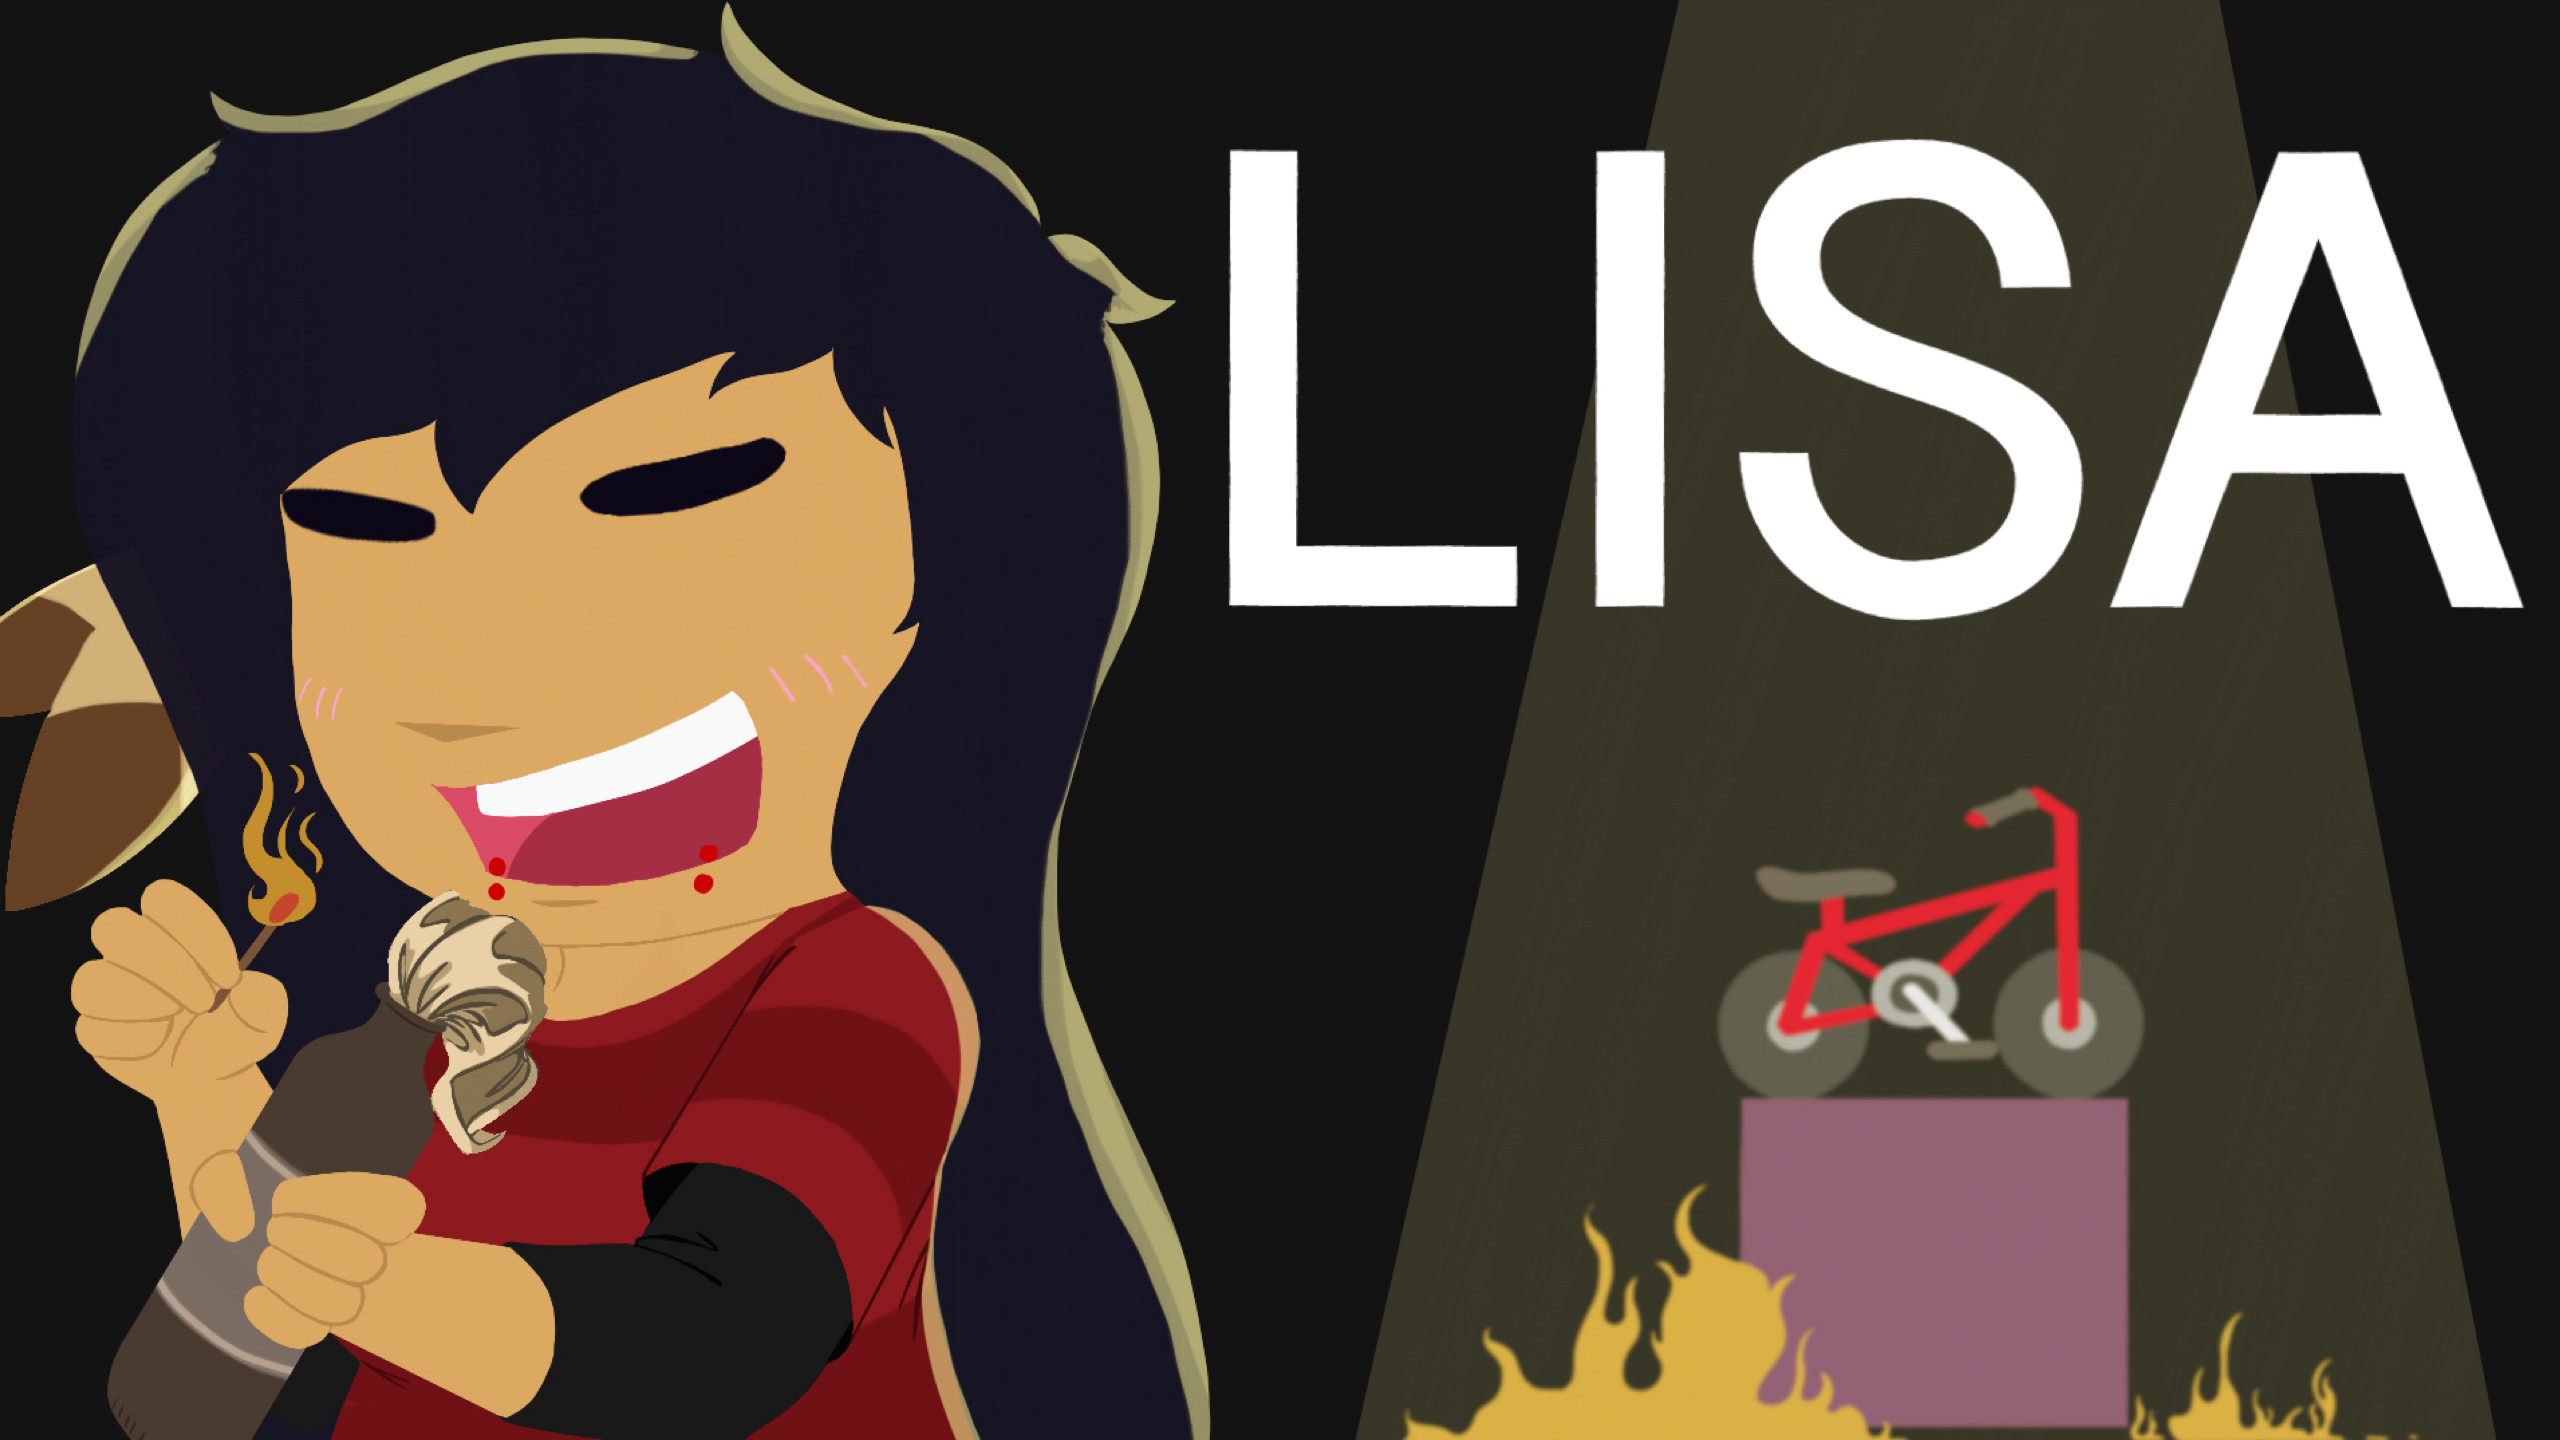 2560x1440 ... Titlecards | Lisa The Painful RPG - 5 by imMurderCupcake